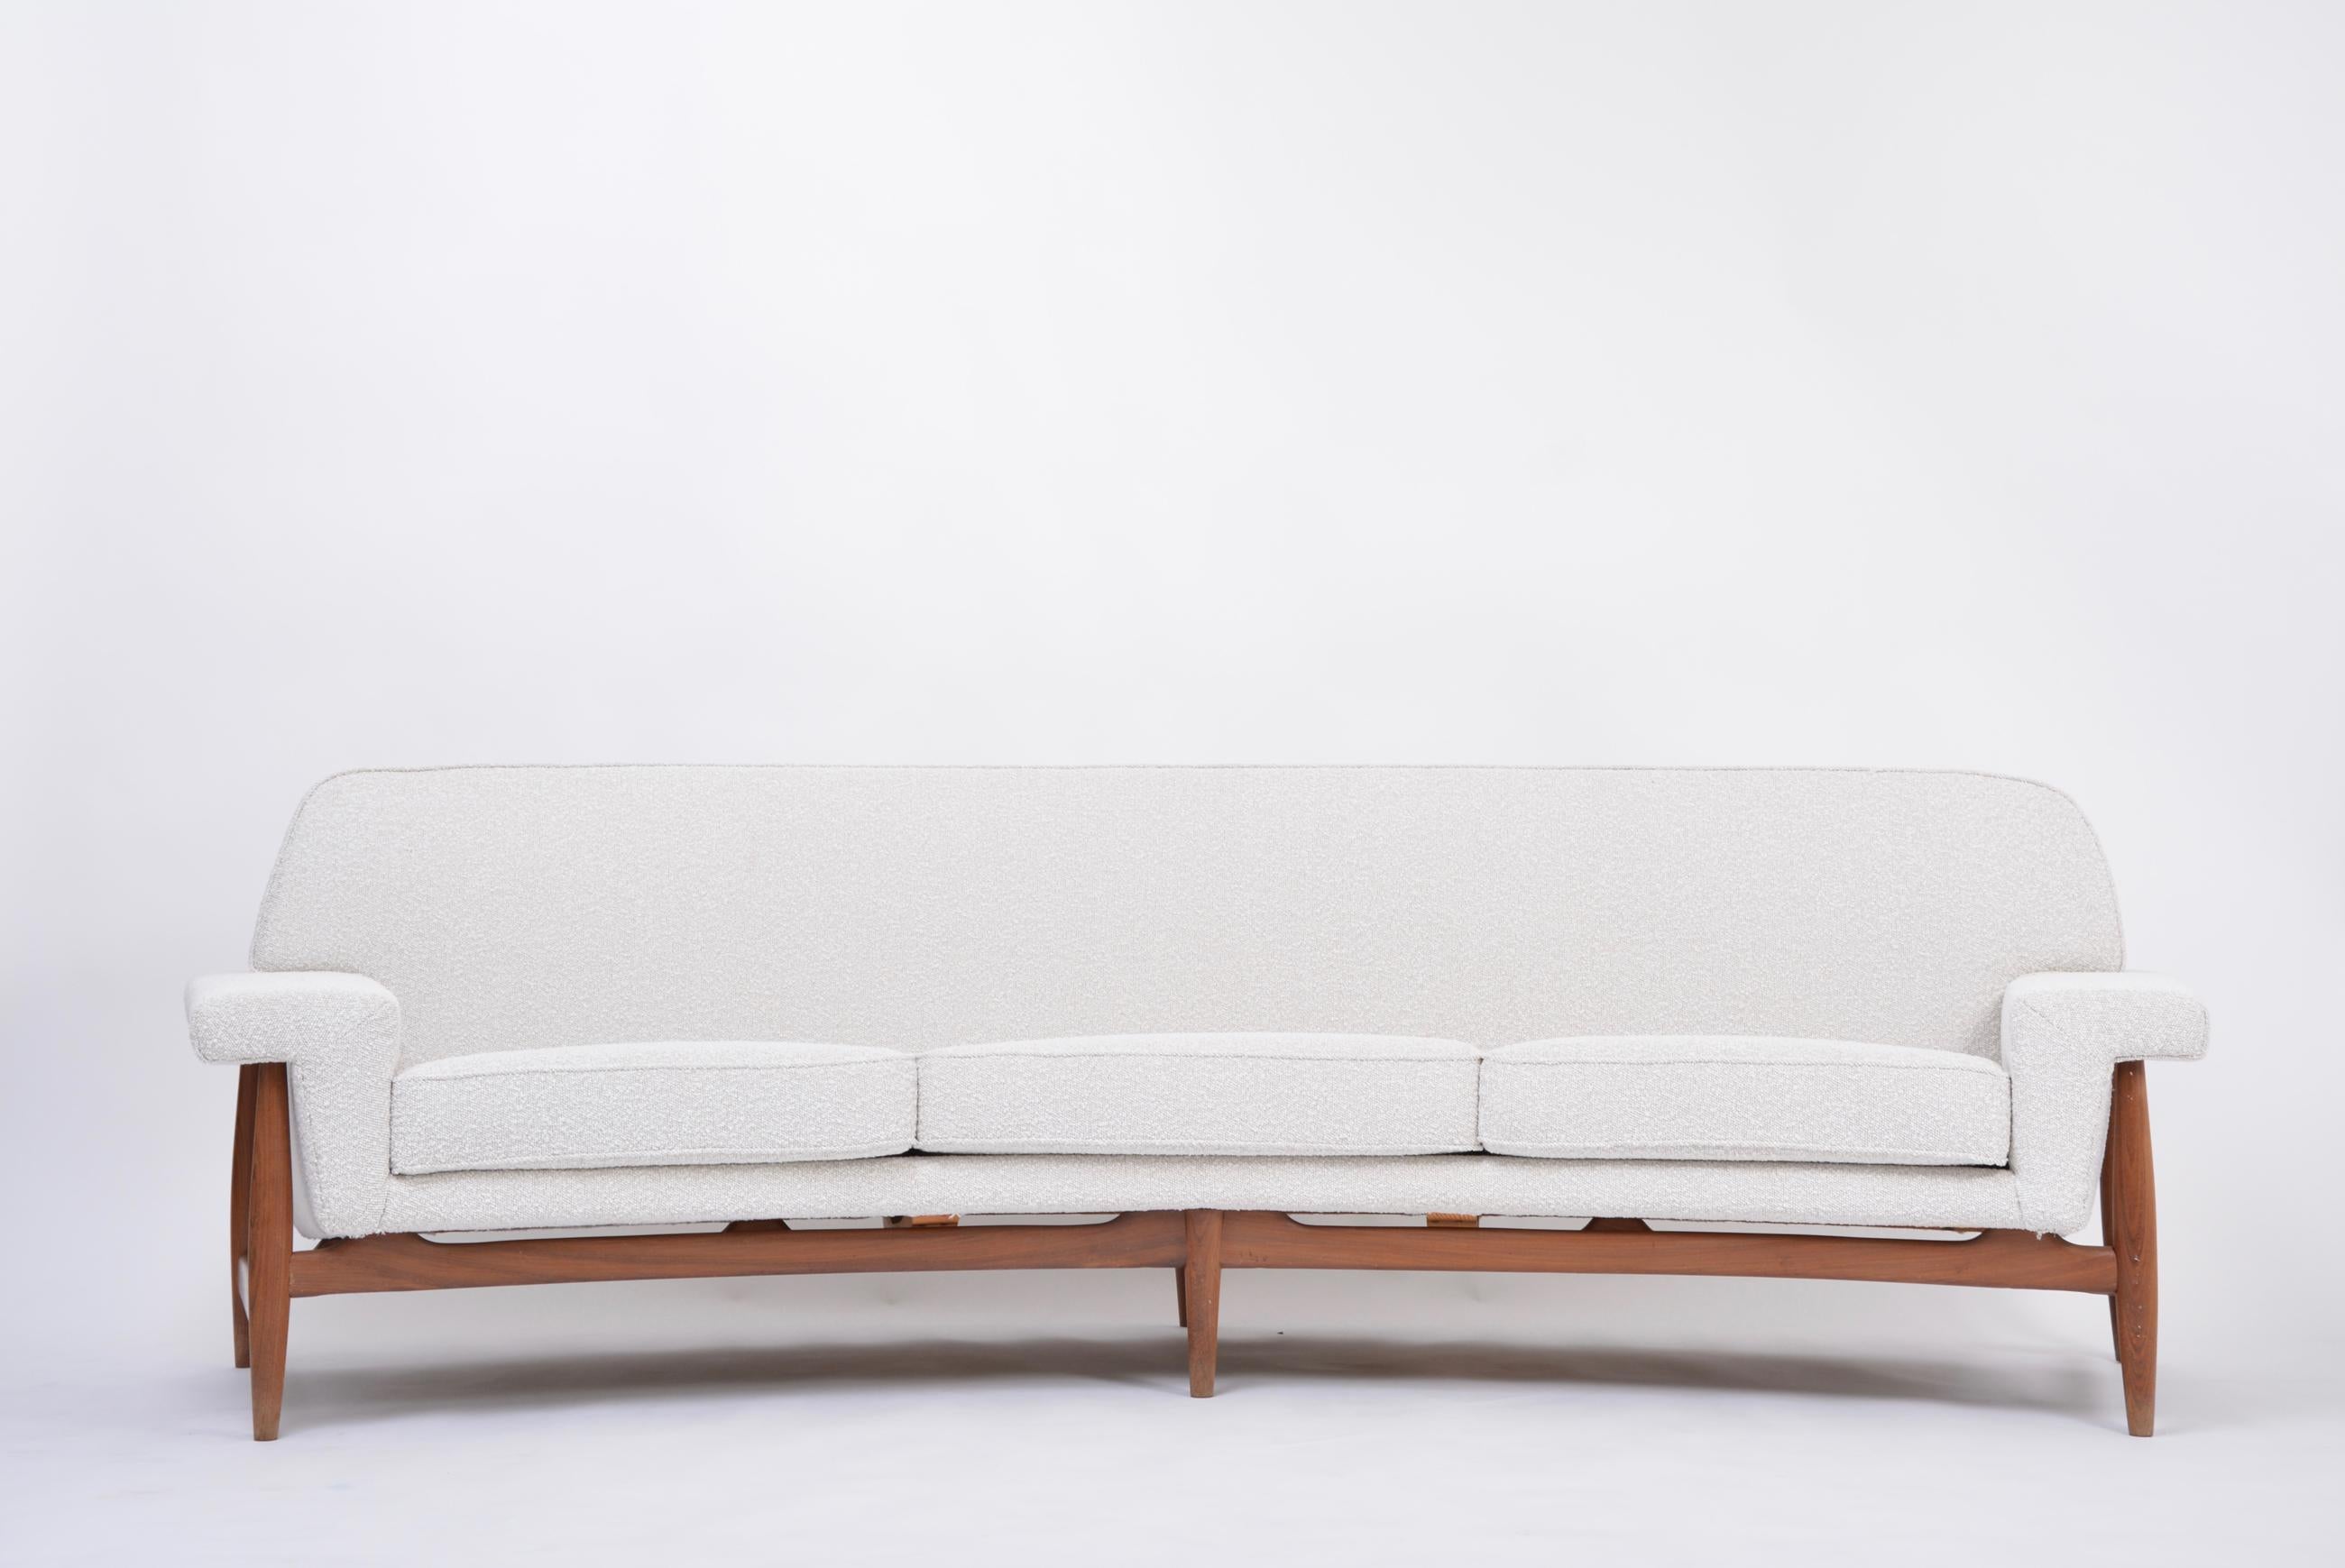 Large white reupholstered Mid-century sofa by Johannes Andersen for Trensum
This Mid-Century Modern sofa was designed by famous Danish designer Johannes Andersen in 1958 and manufactured at Trensum Møbelfabrik in Sweden. A wonderful example of